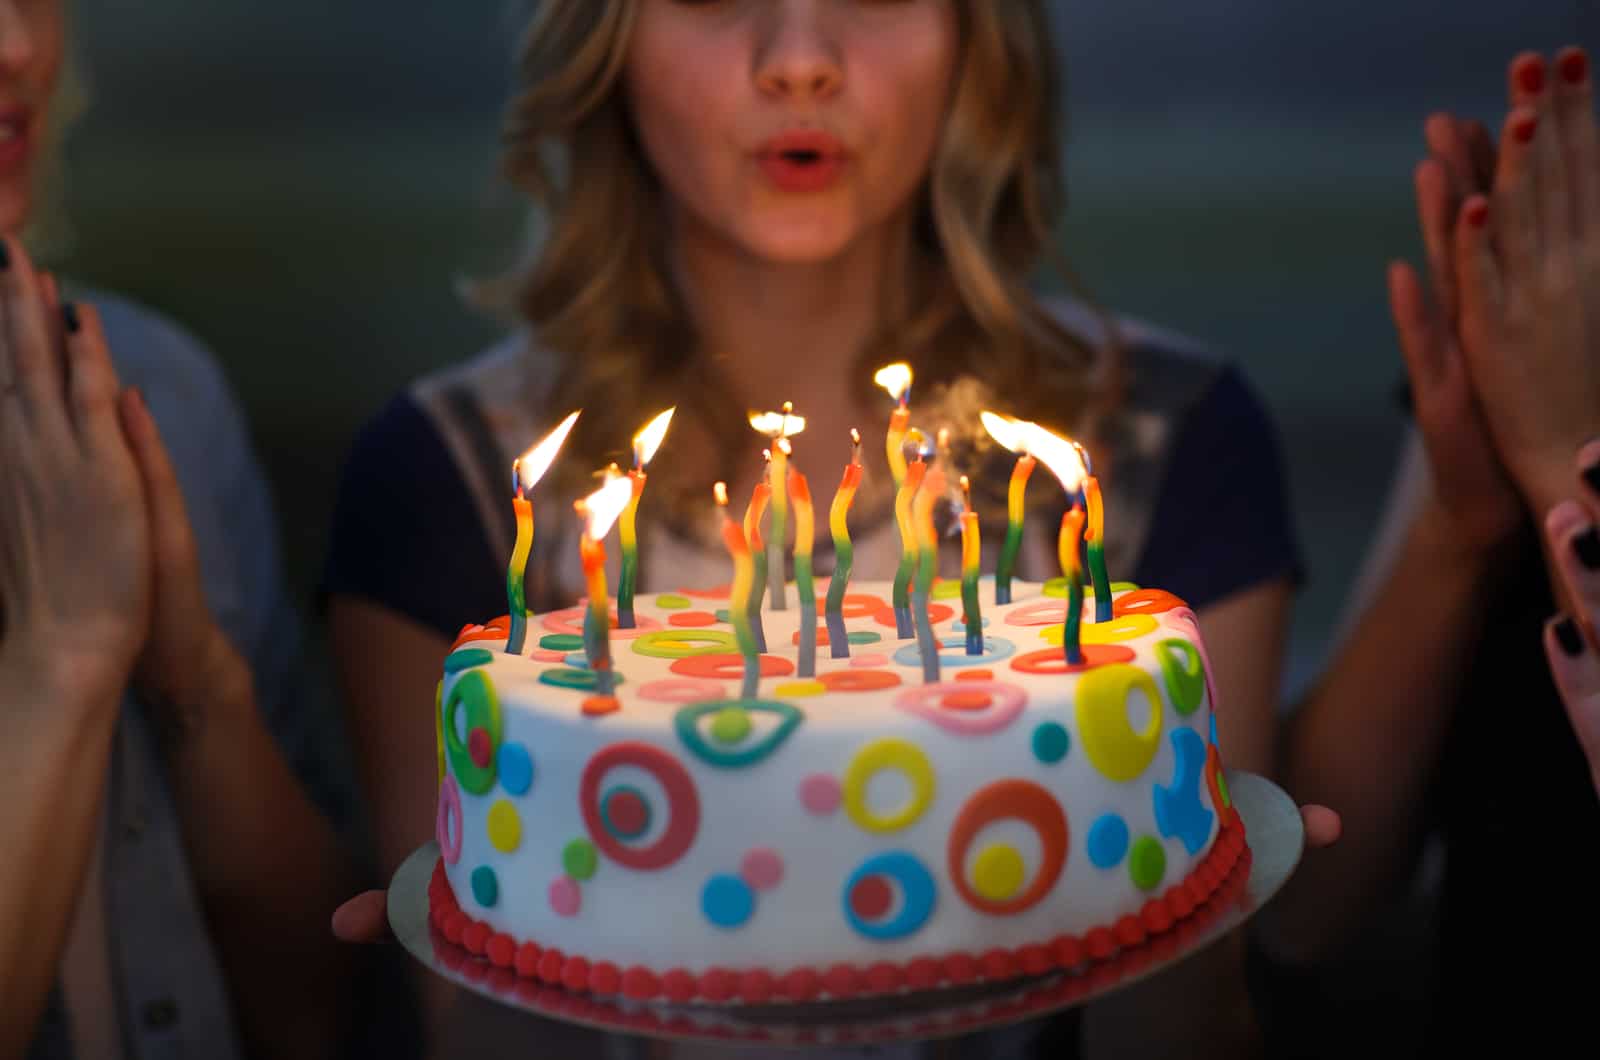 How To Make Your Birthday Special For Yourself: Top 15 Ideas